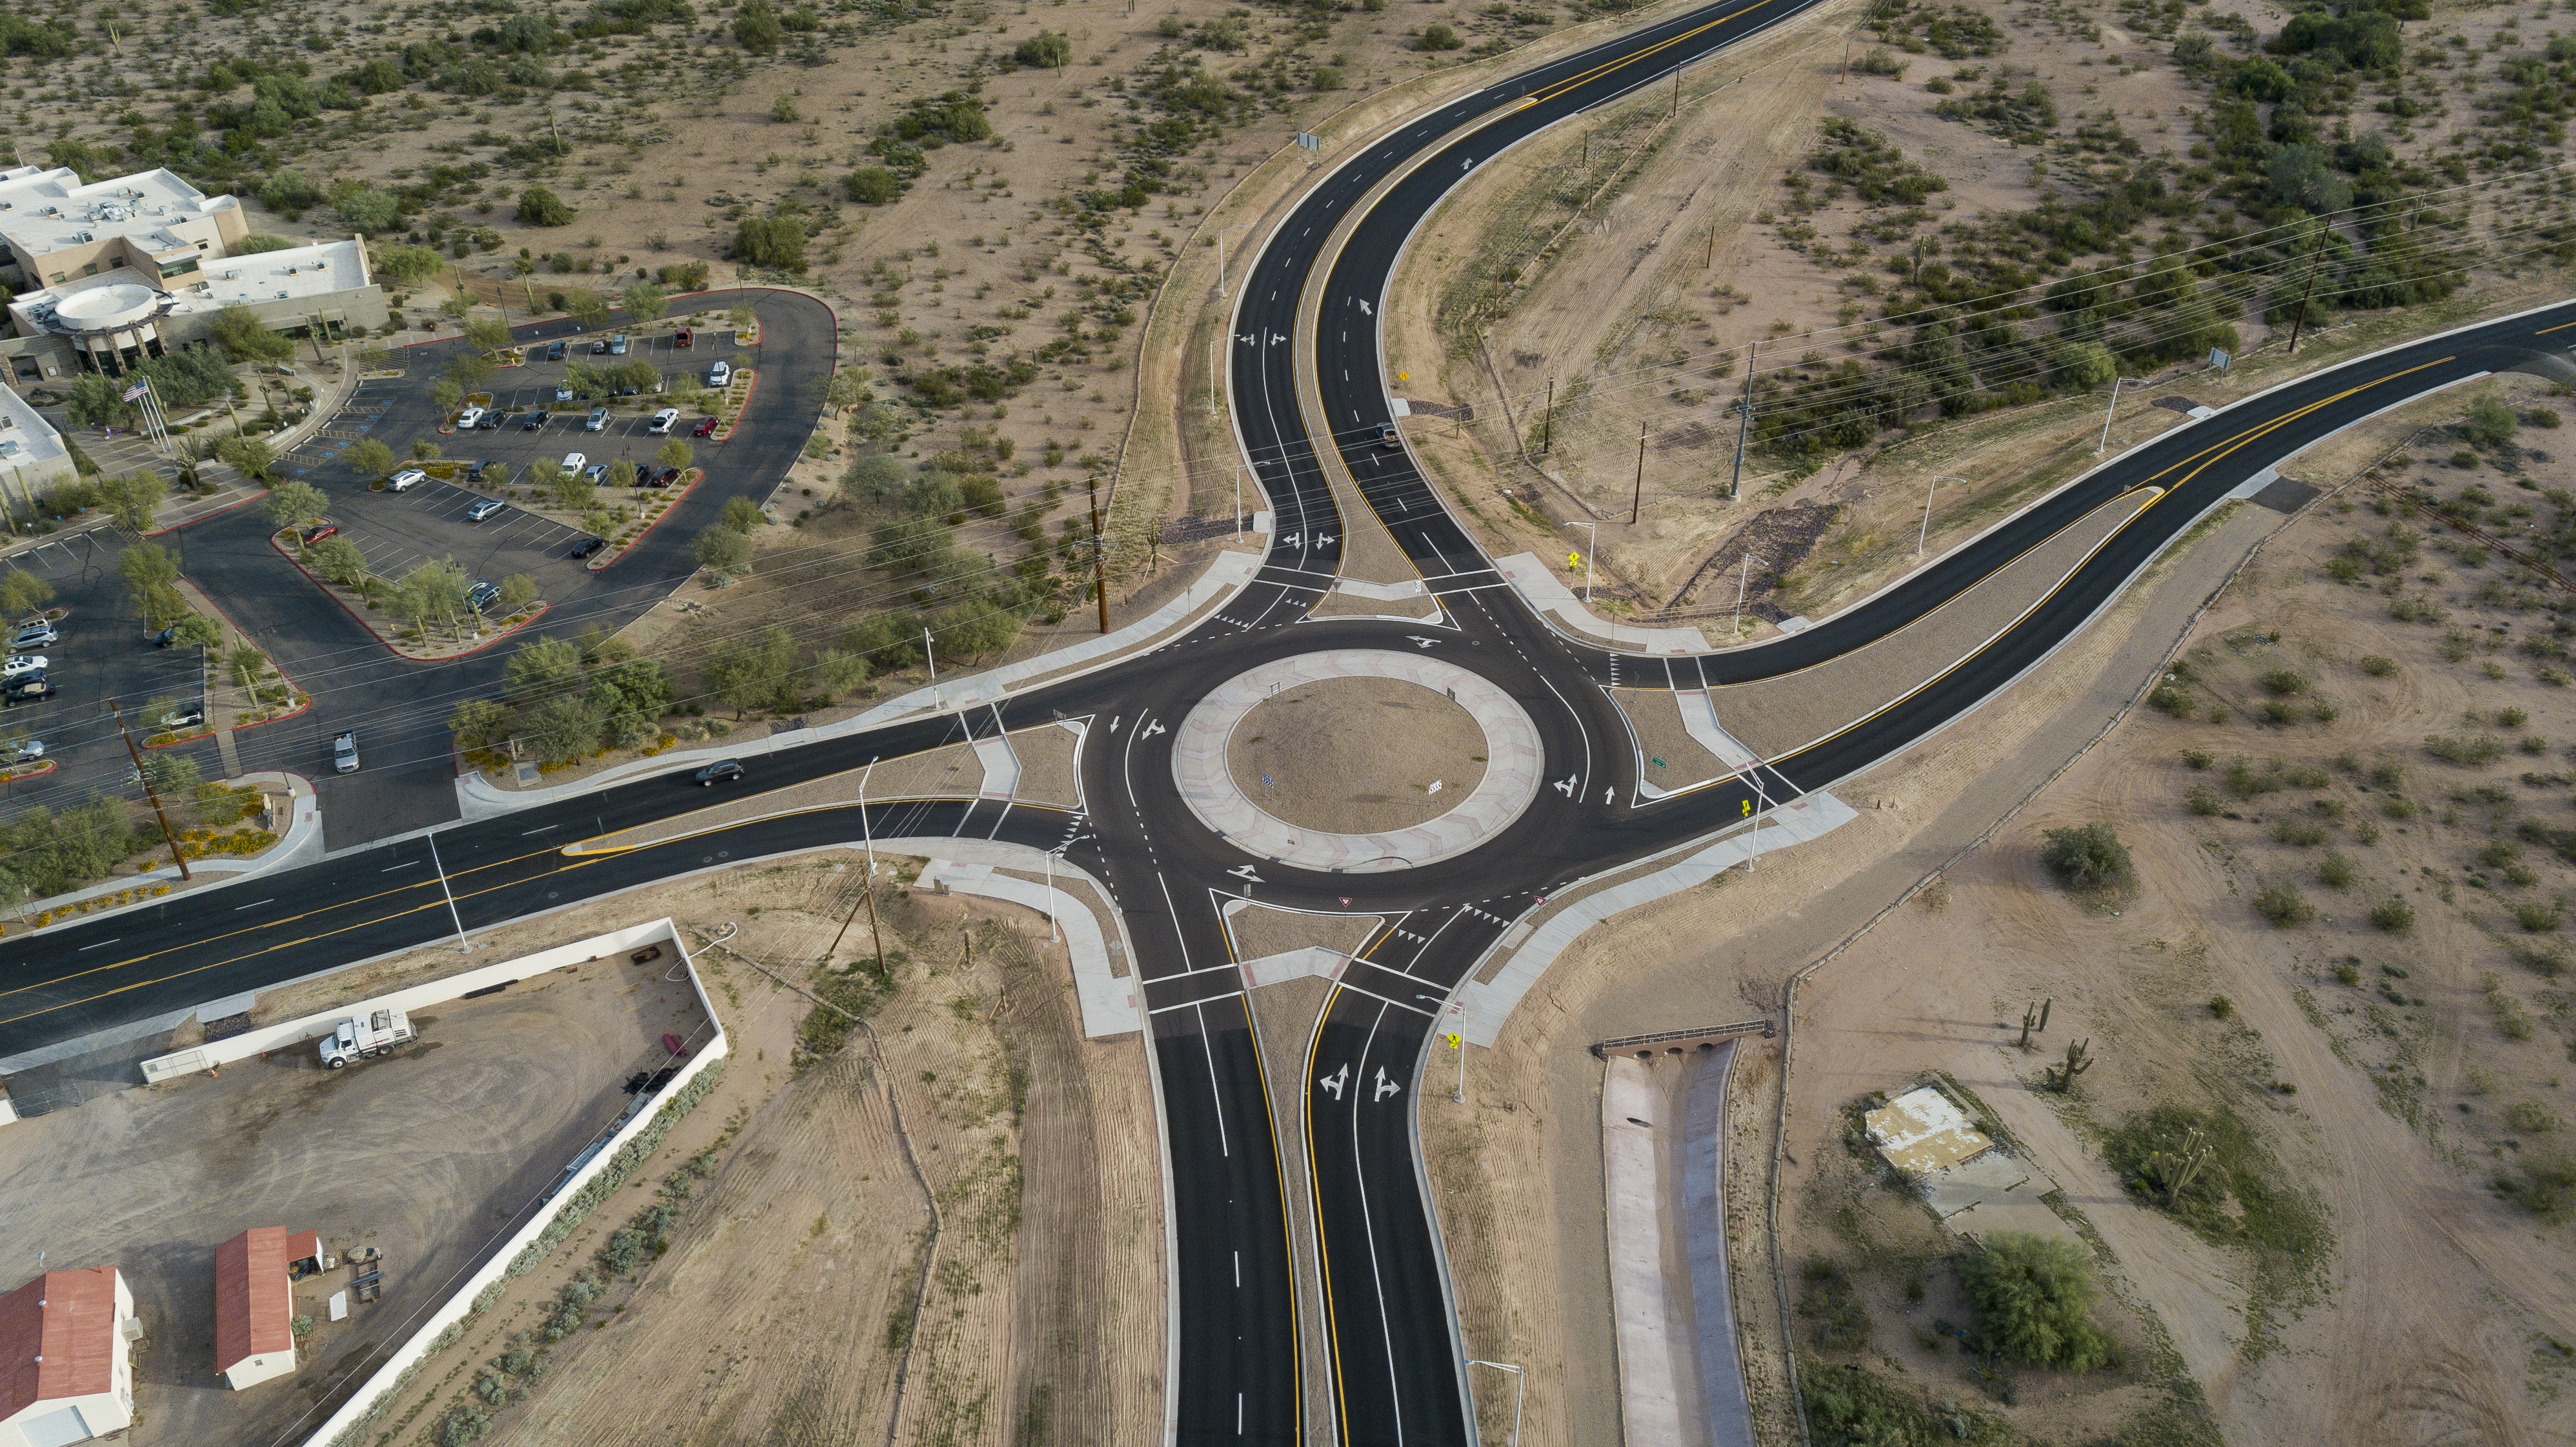 Roundabout drone view